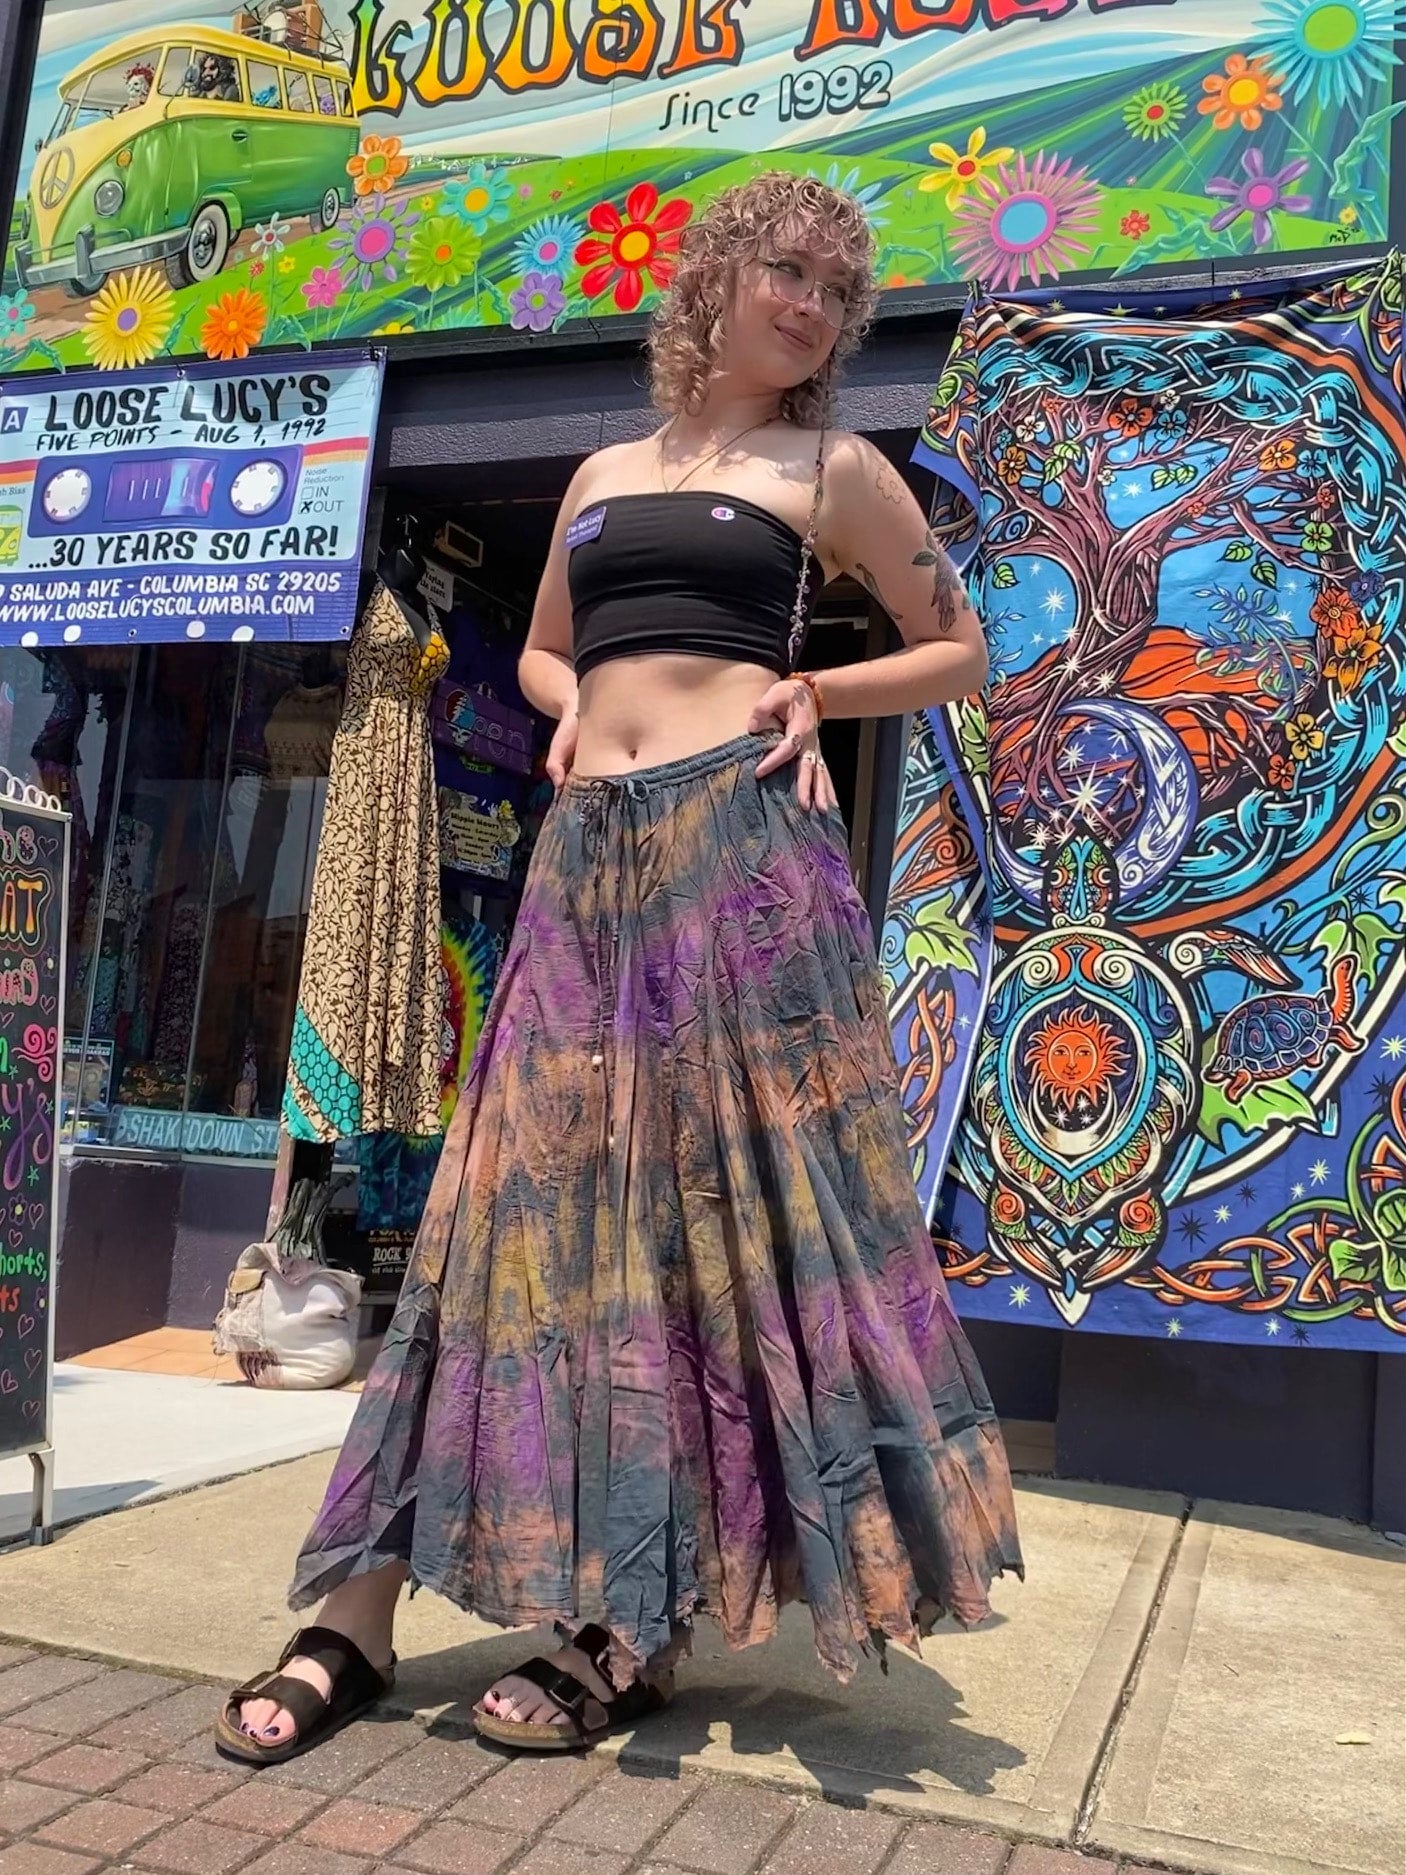 Spinner Skirt  Loose Lucy's - Five Points